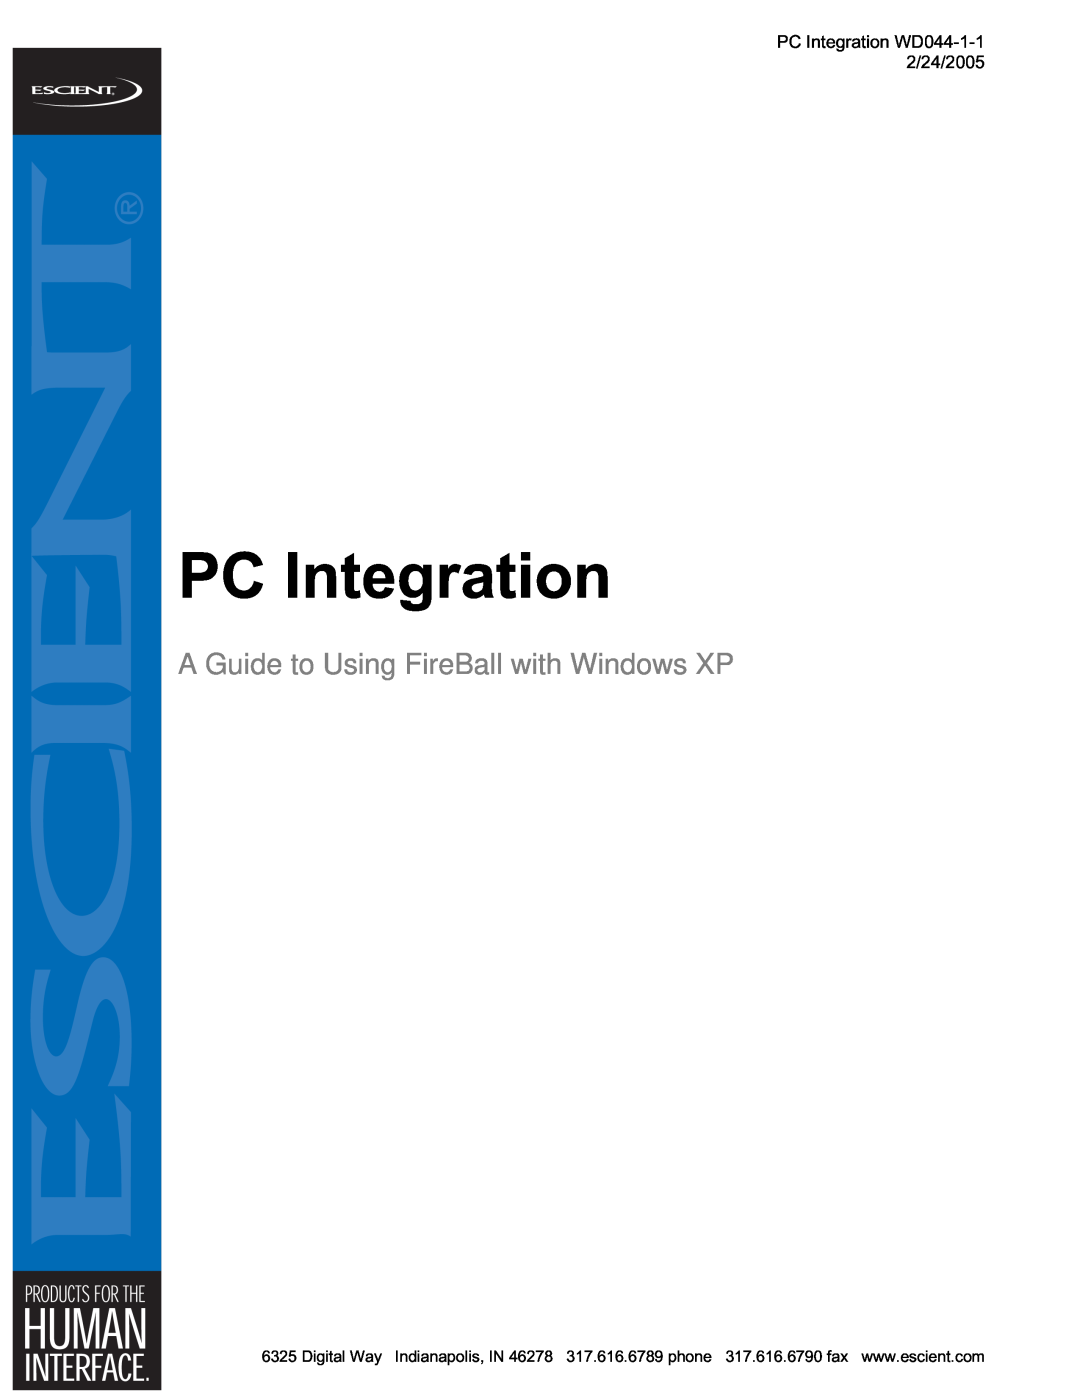 Escient MP-150 manual PC Integration, A Guide to Using FireBall with Windows XP 